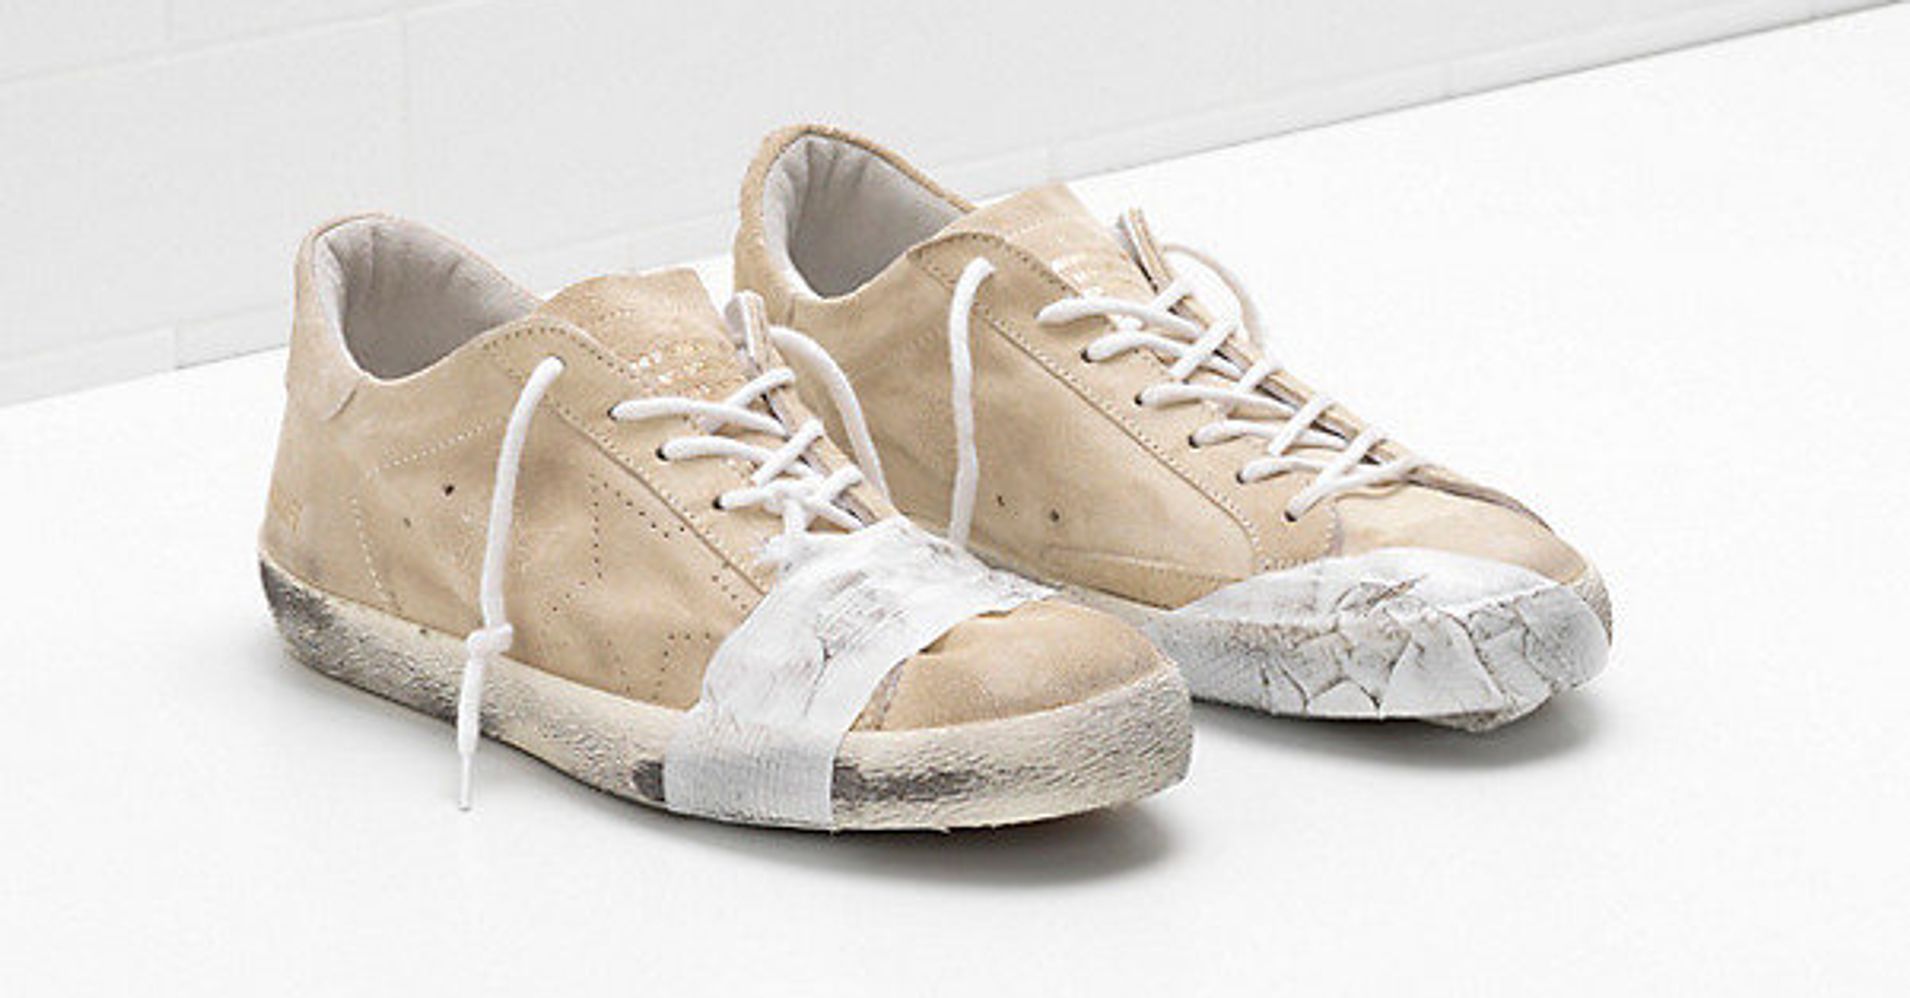 People Can't Believe These Taped-Up, Dirty-Looking Sneakers Cost $530 ...